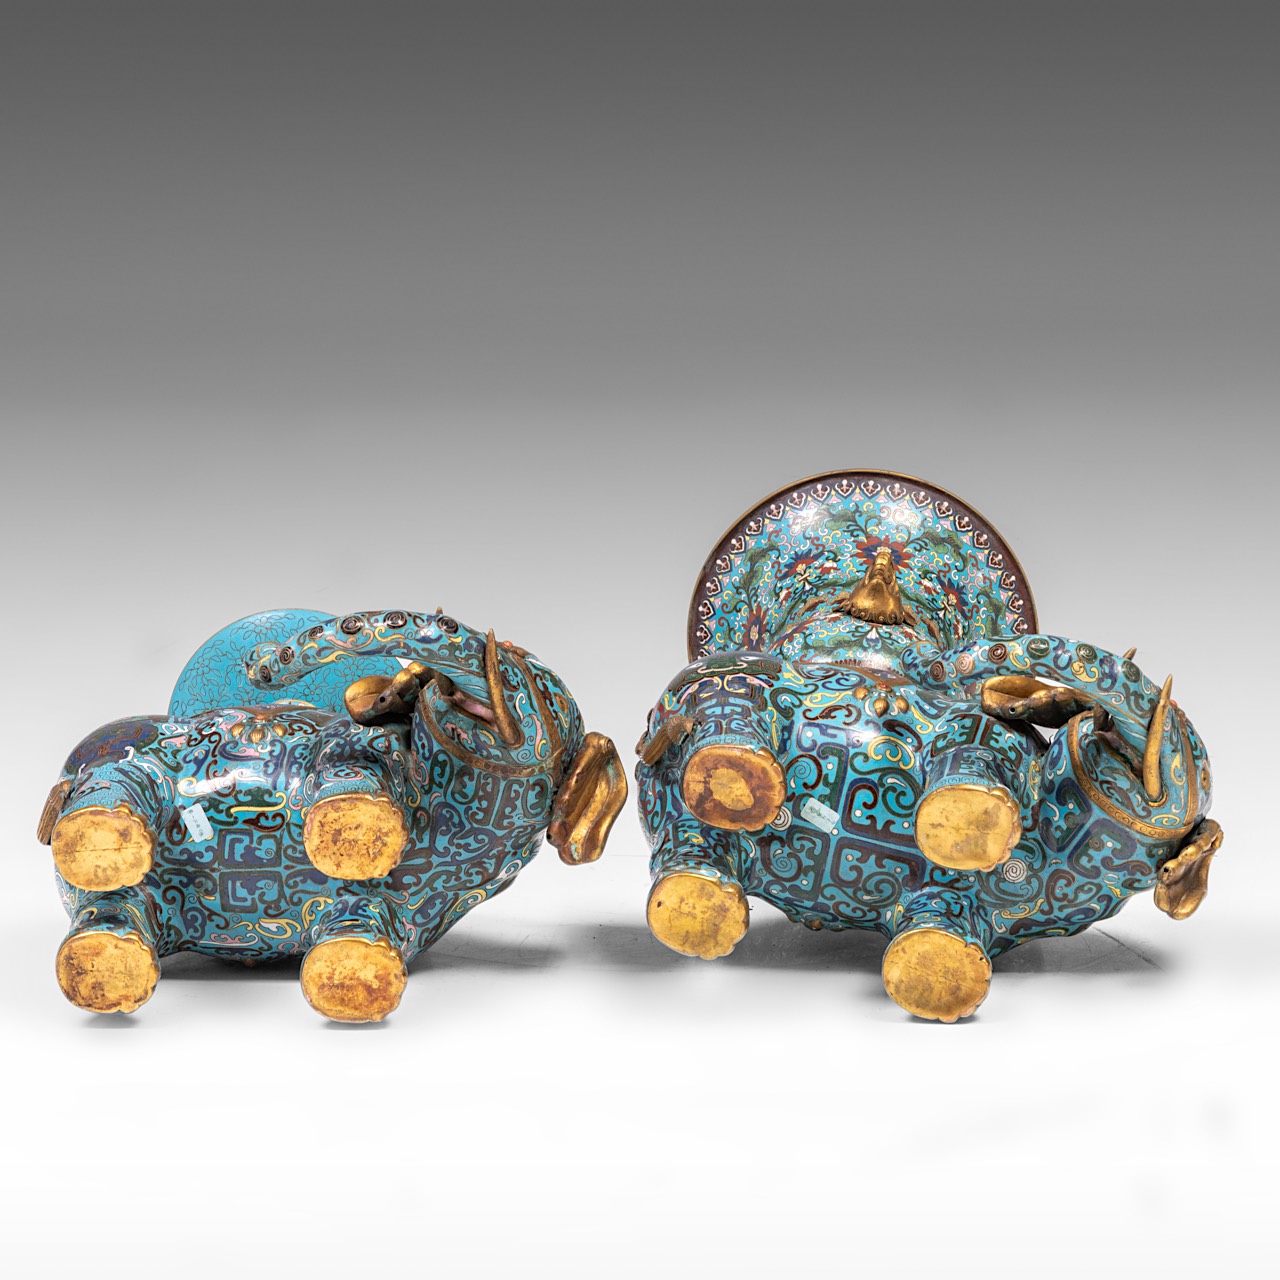 A Chinese five-piece semi-precious stone inlaid cloisonne garniture, late Qing/20thC, tallest H 58 - - Image 16 of 24